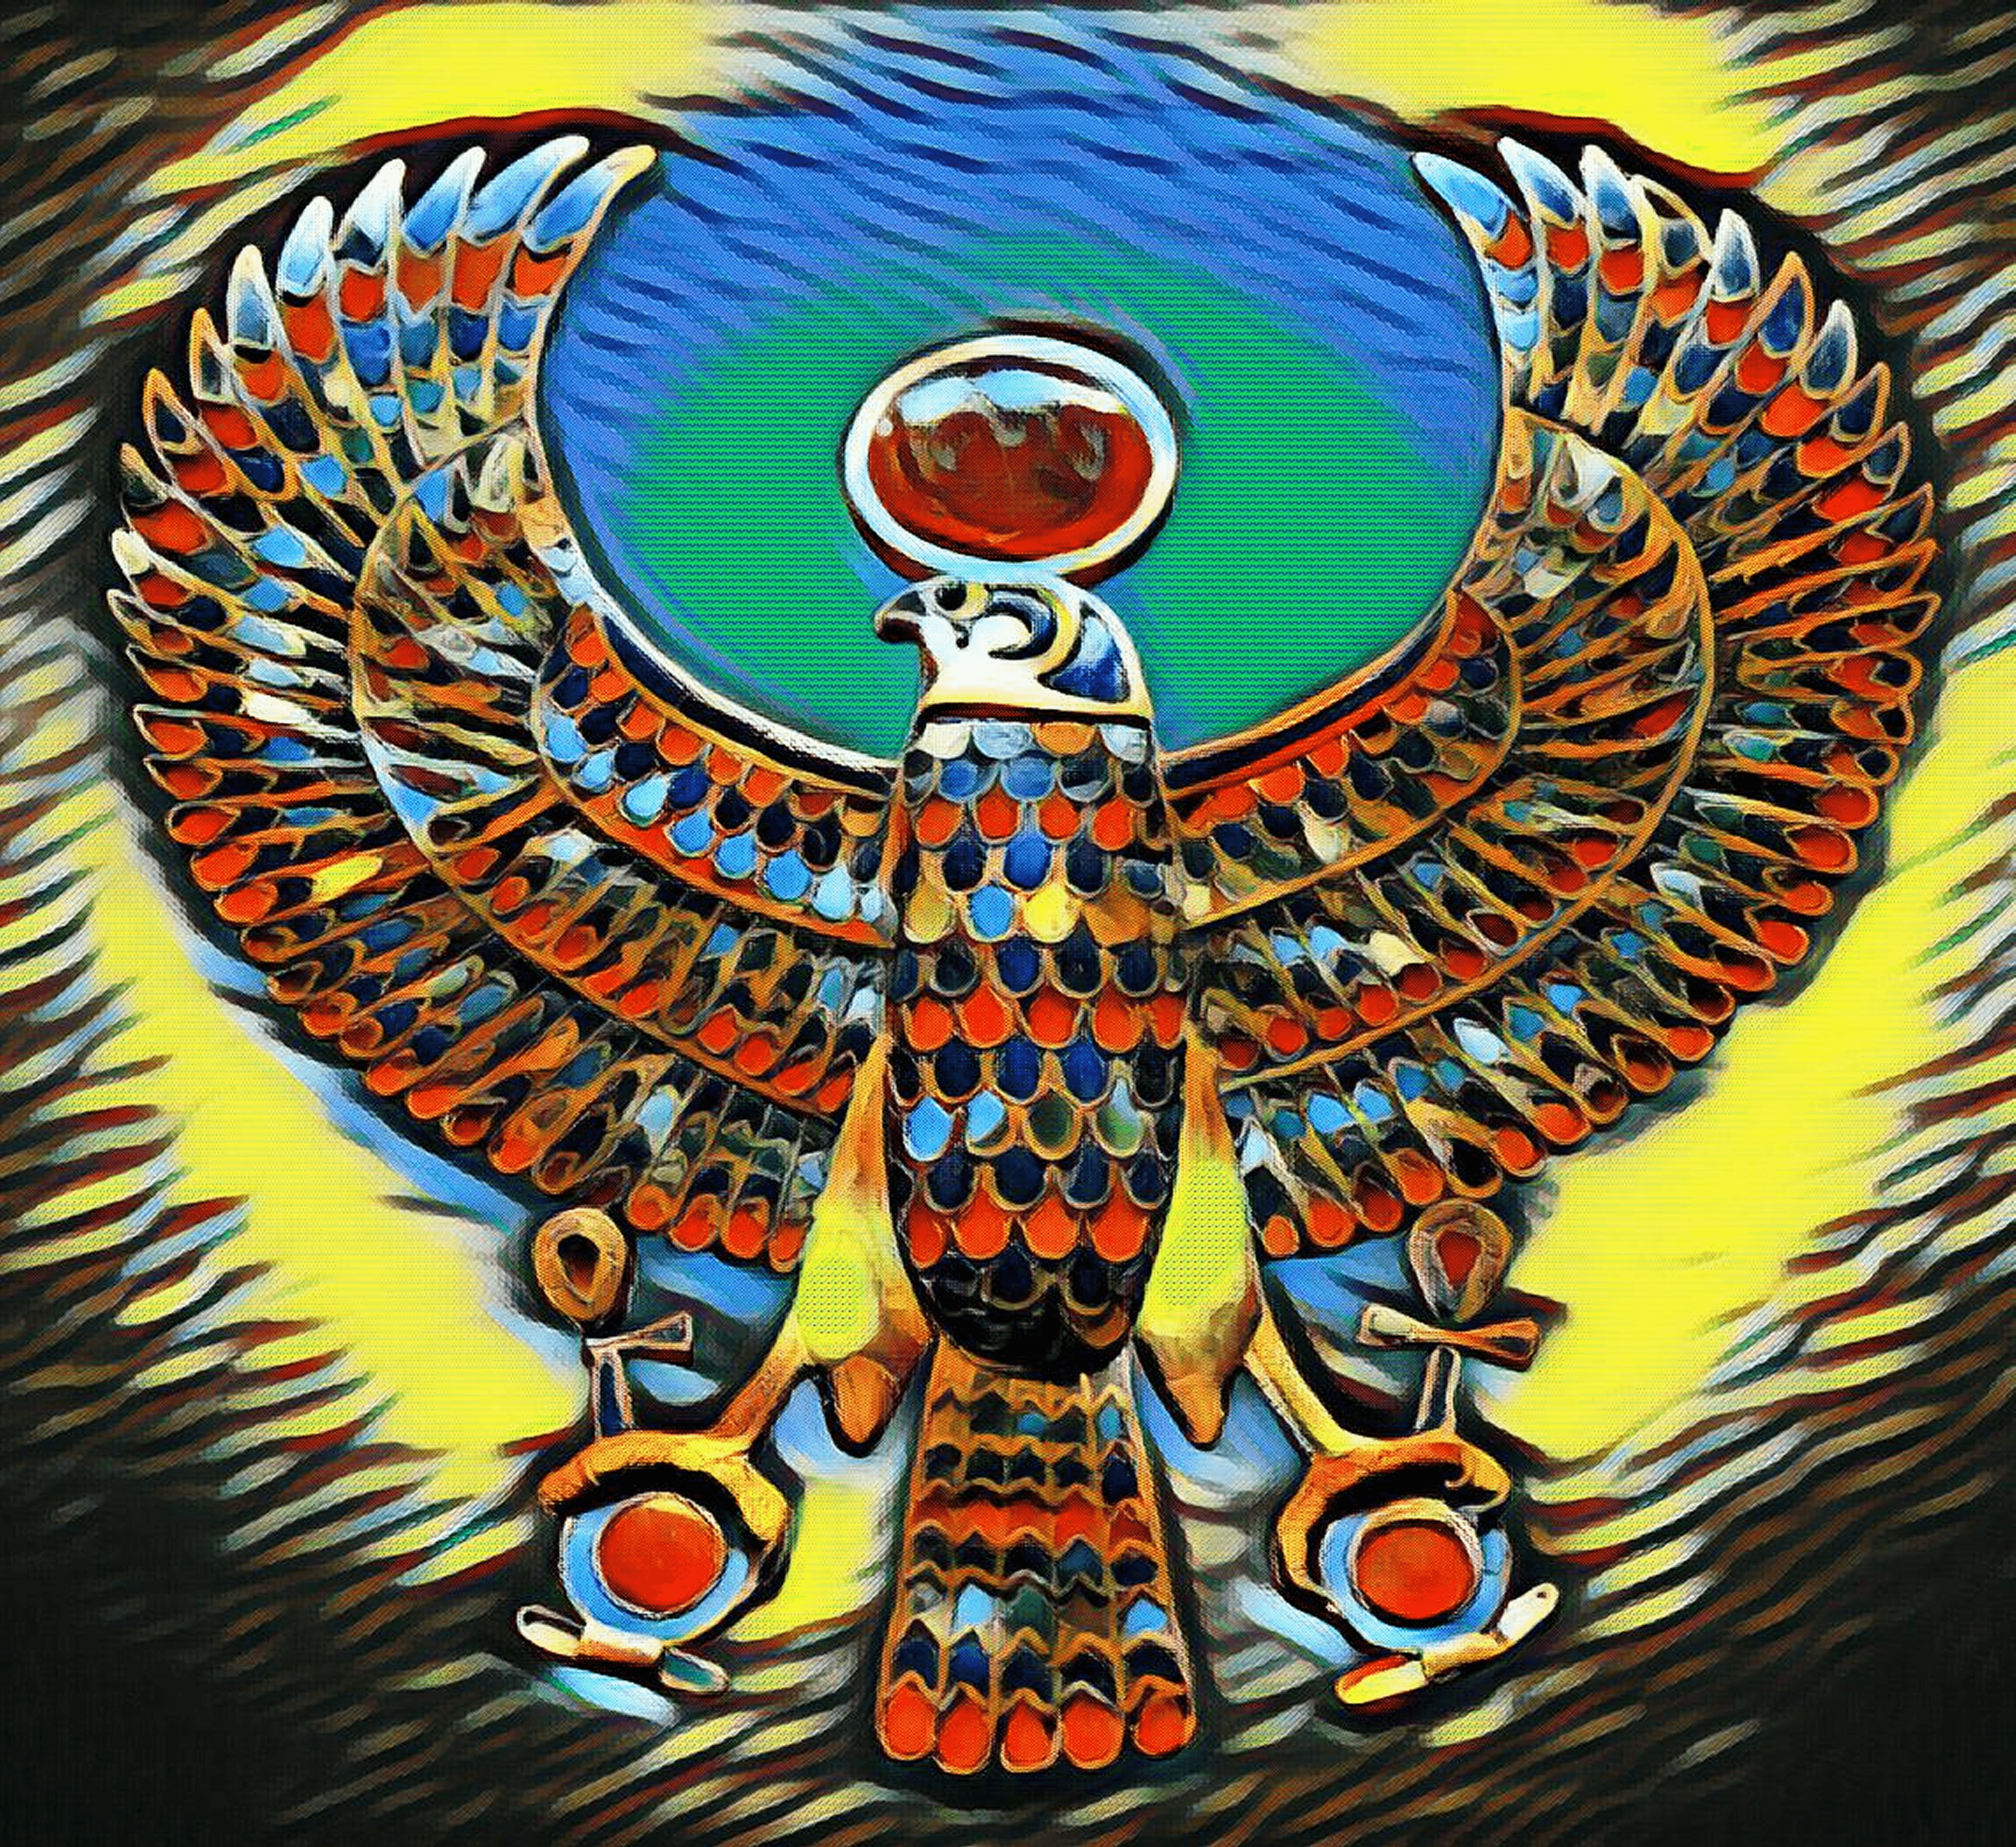 Horus Egyptian God NFT Pop Art NFT by SOLLOG Limited Minting 10 Copies on Polygon Opensea